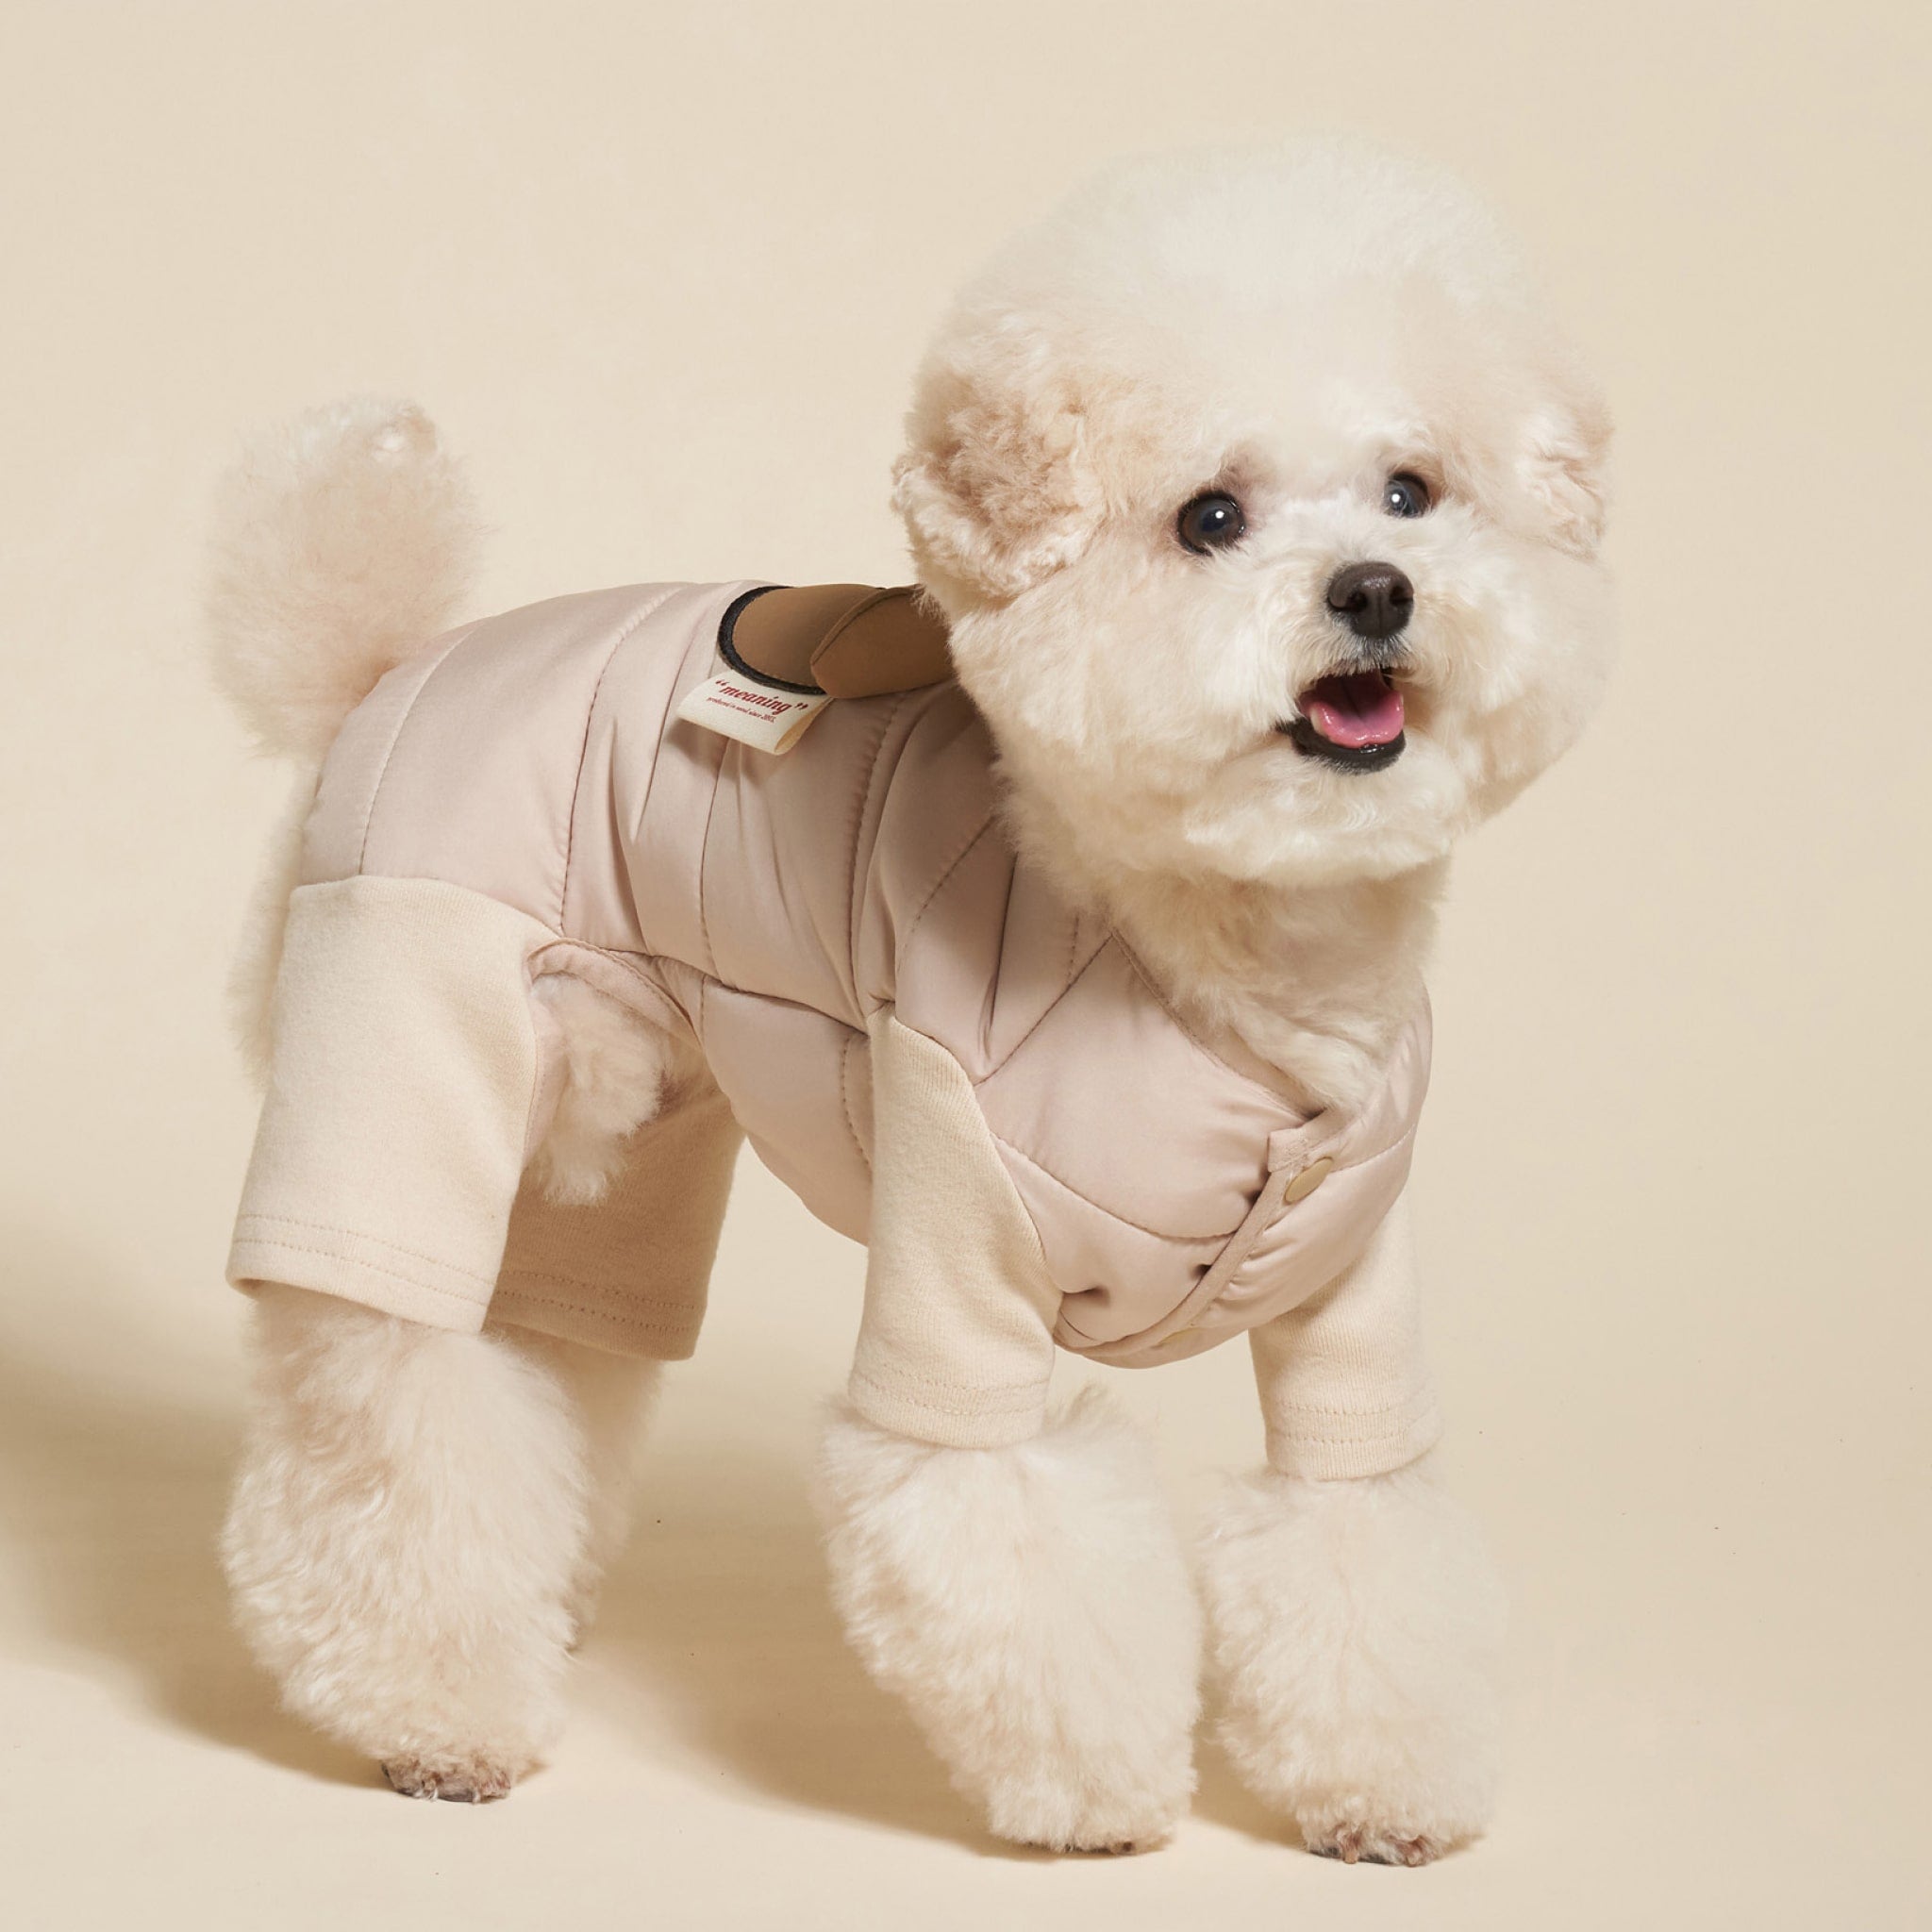 Dog wearing beige padded bear jumpsuit while standing